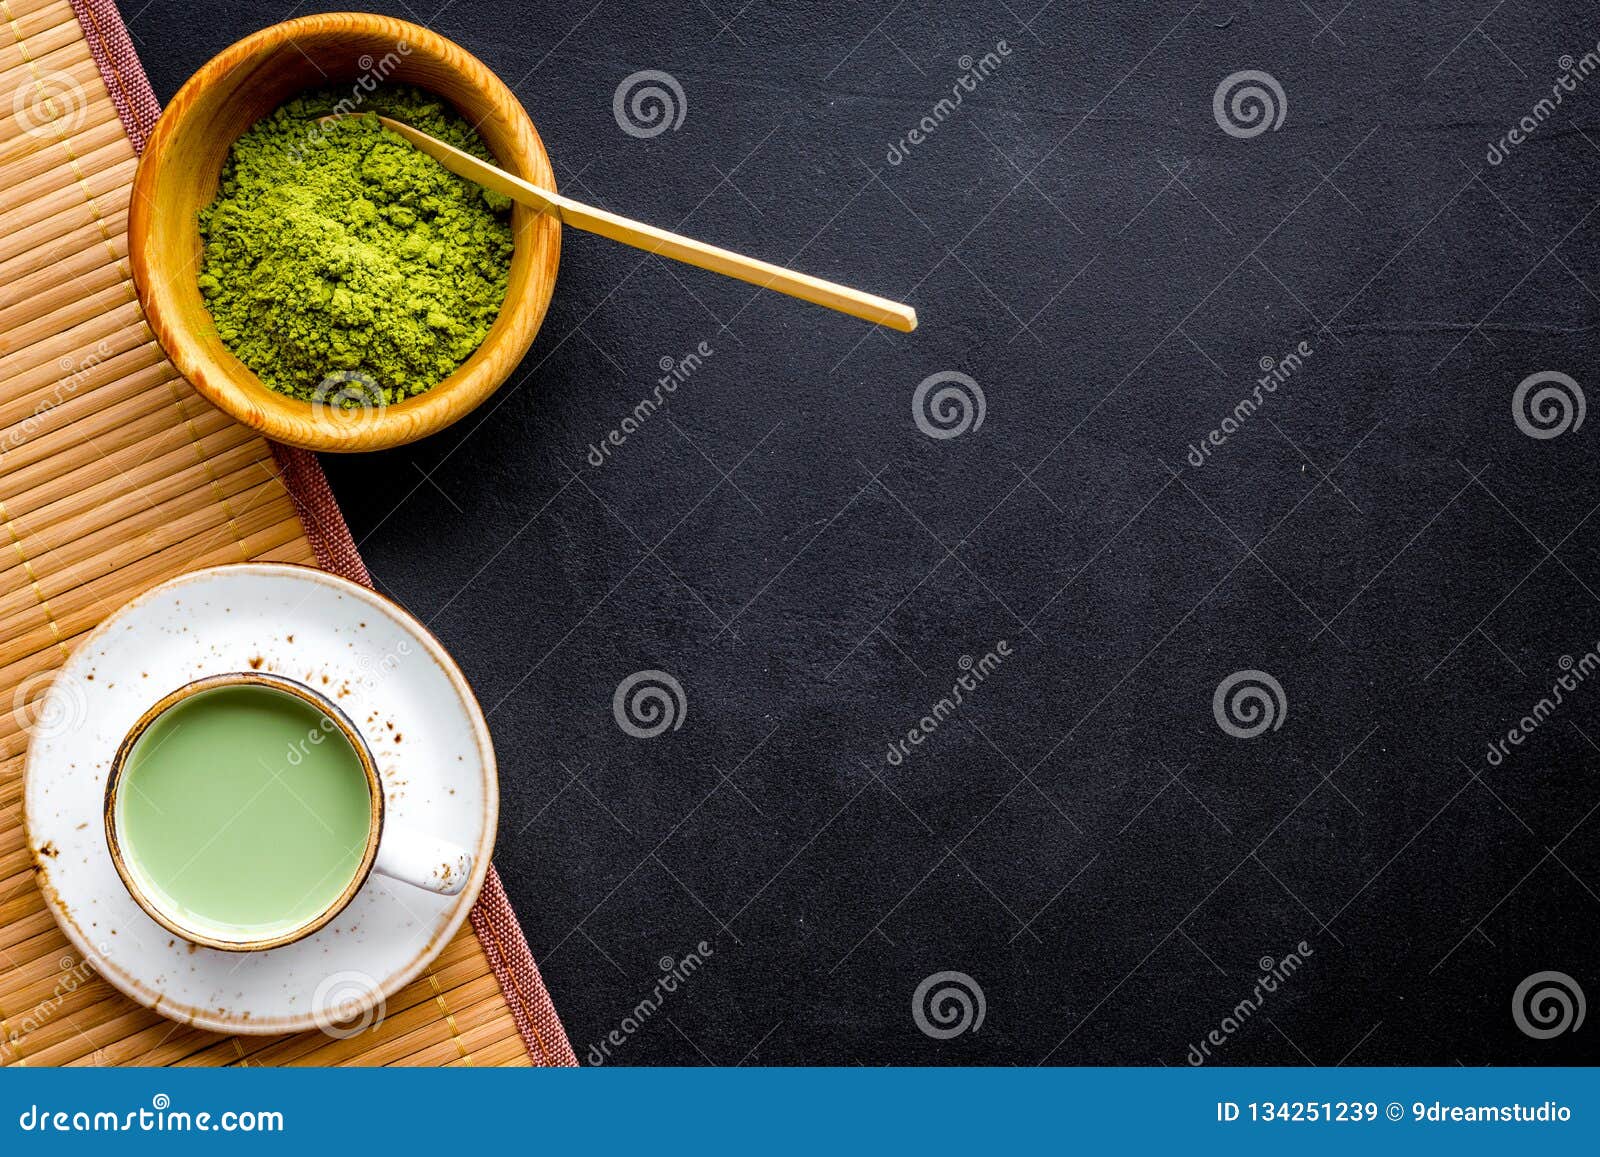 Coffee And Cocktails With Matcha Concept. Matcha Latte Near Bowl With Matcha Powder And ...